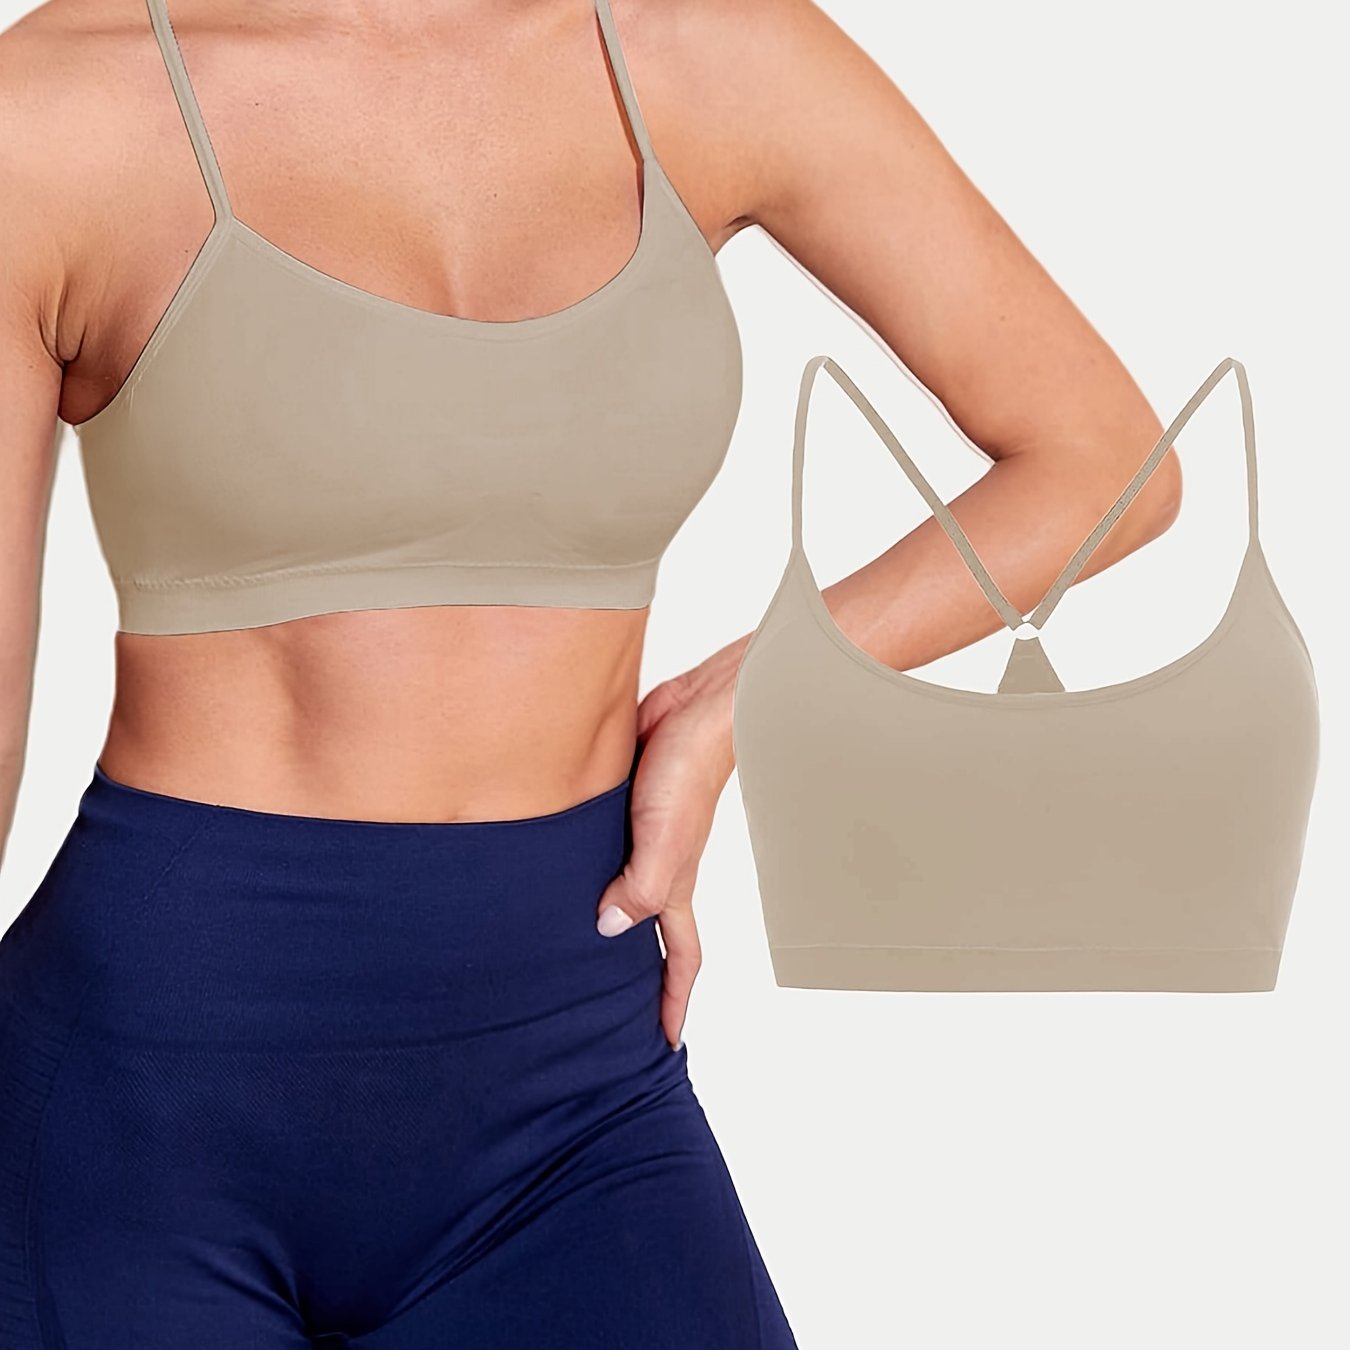 Intimates Sports Bras, Lightly Padded Antibacterial Racer Back Sports Bra  for Women at